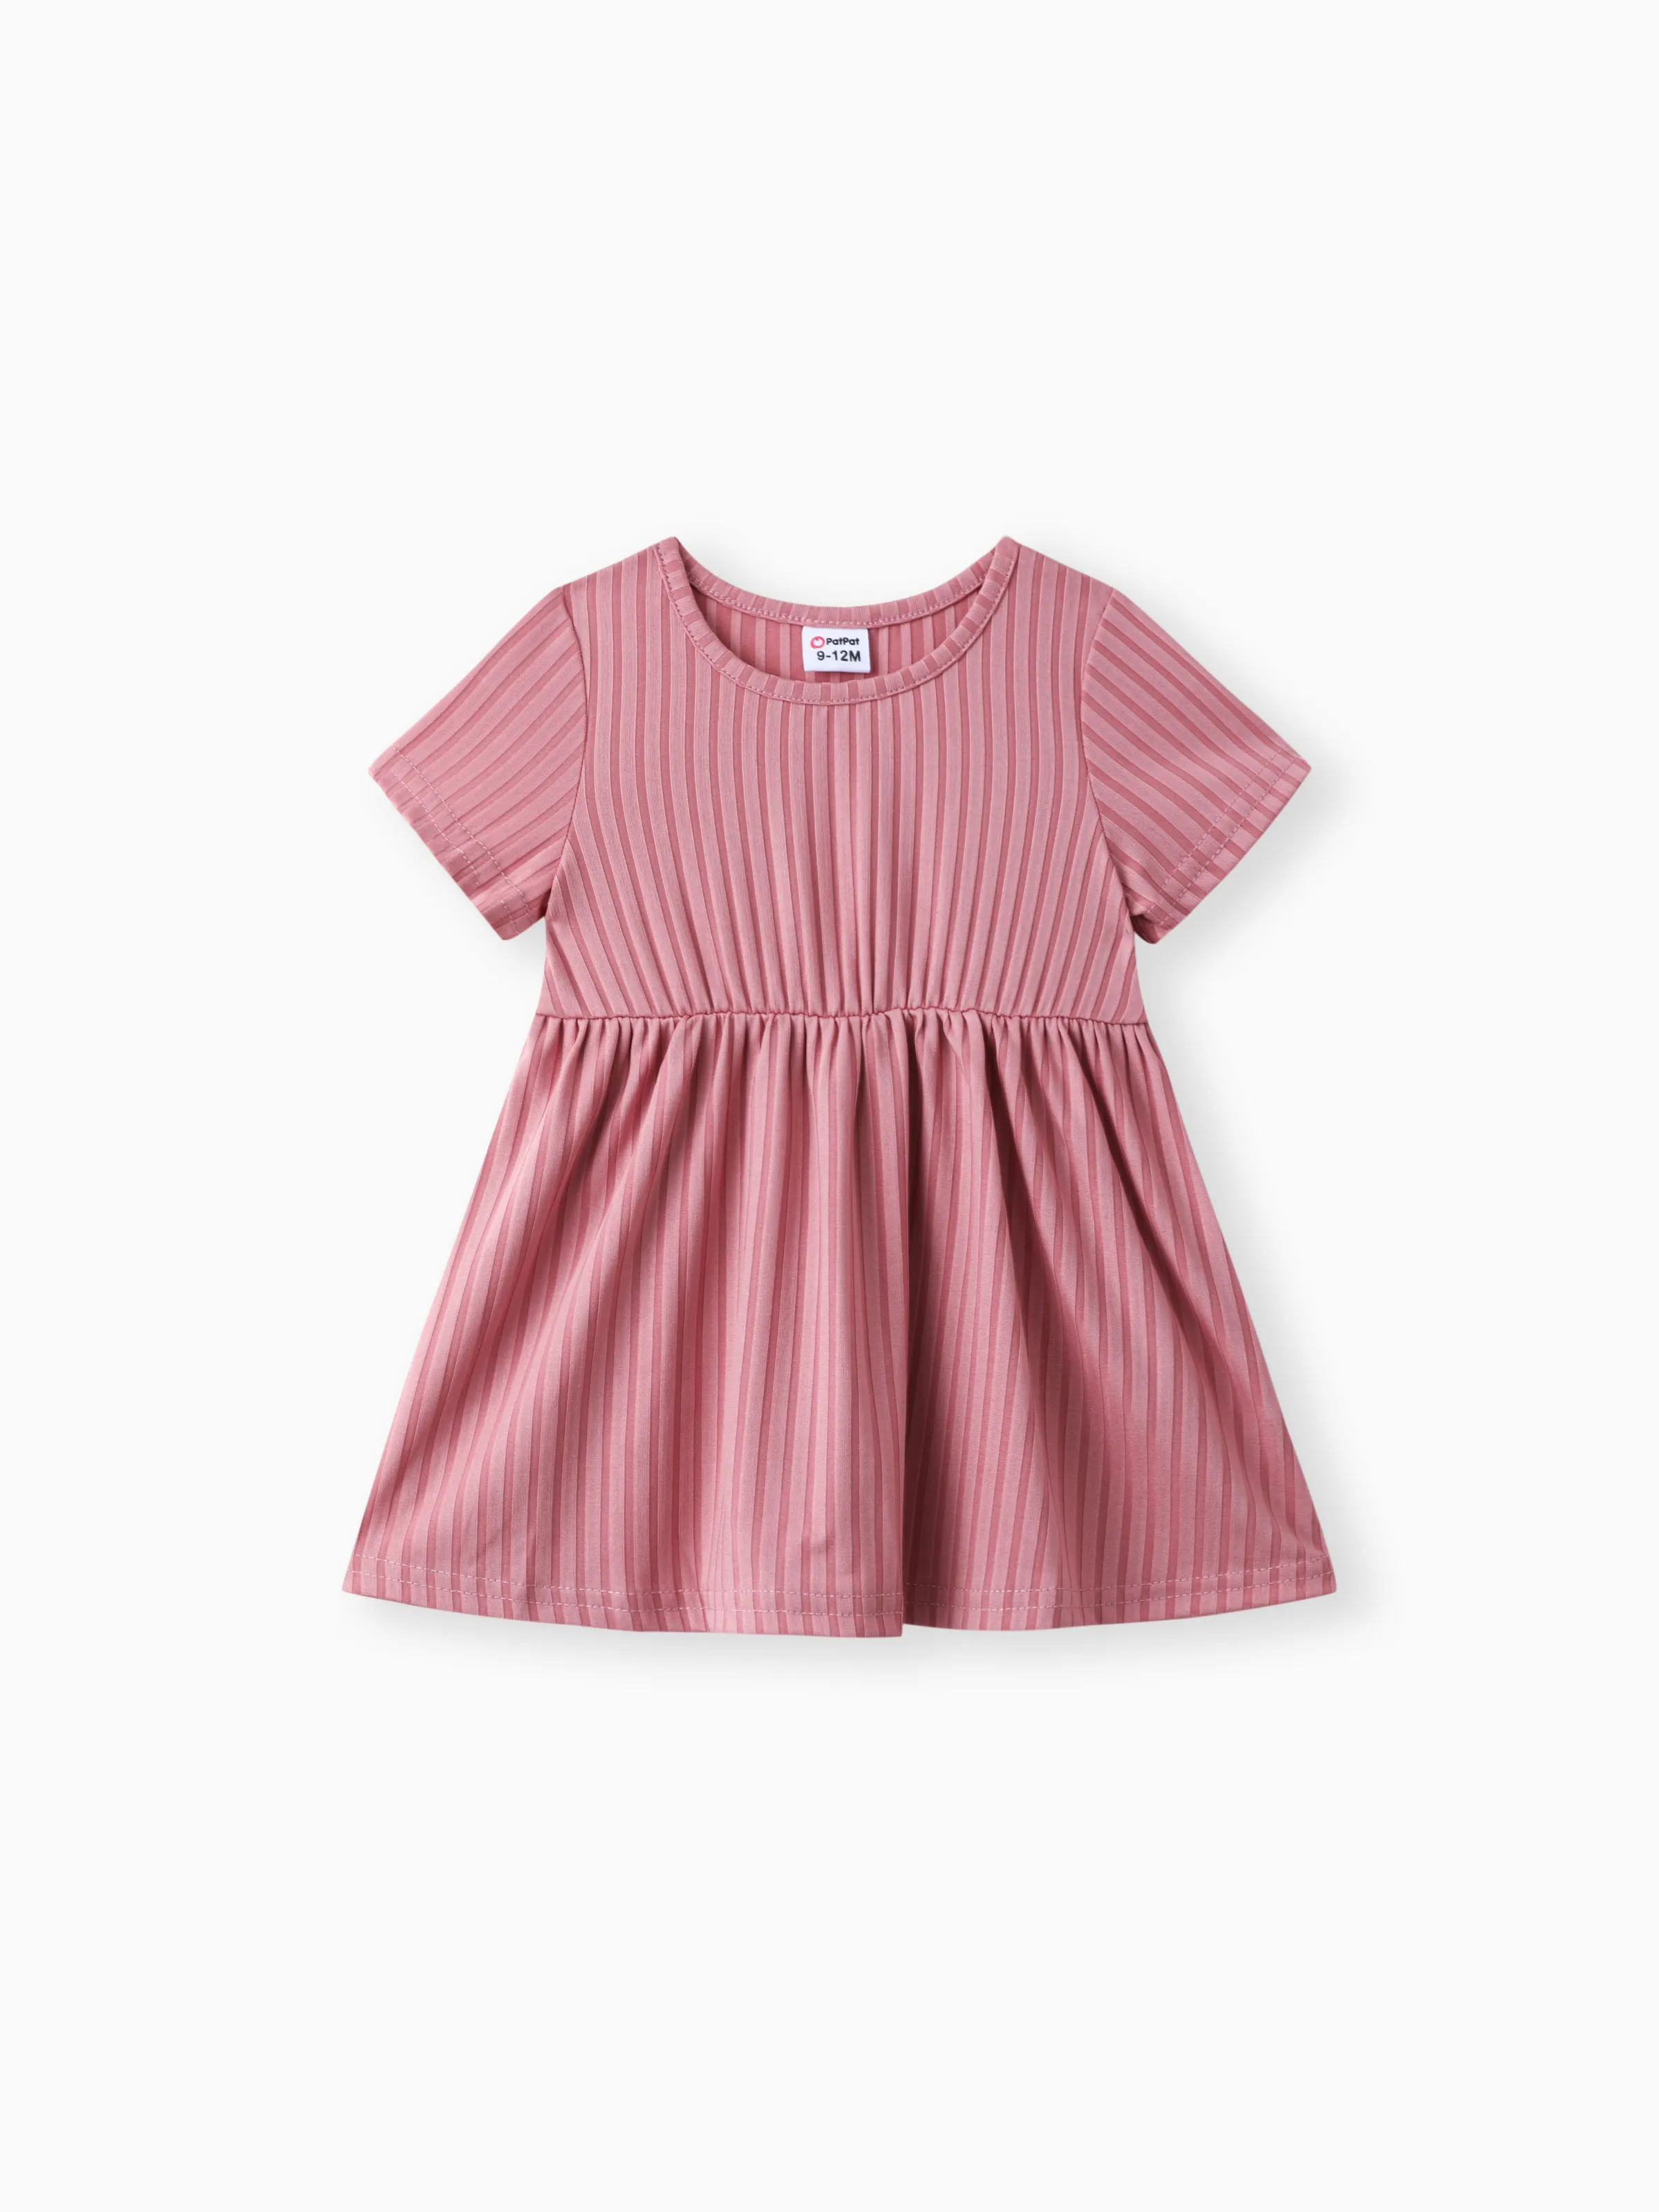 

Rabbit Short Sleeve Dress for Baby Girl - Soft and Comfy, 95% Polyester, 1 Piece